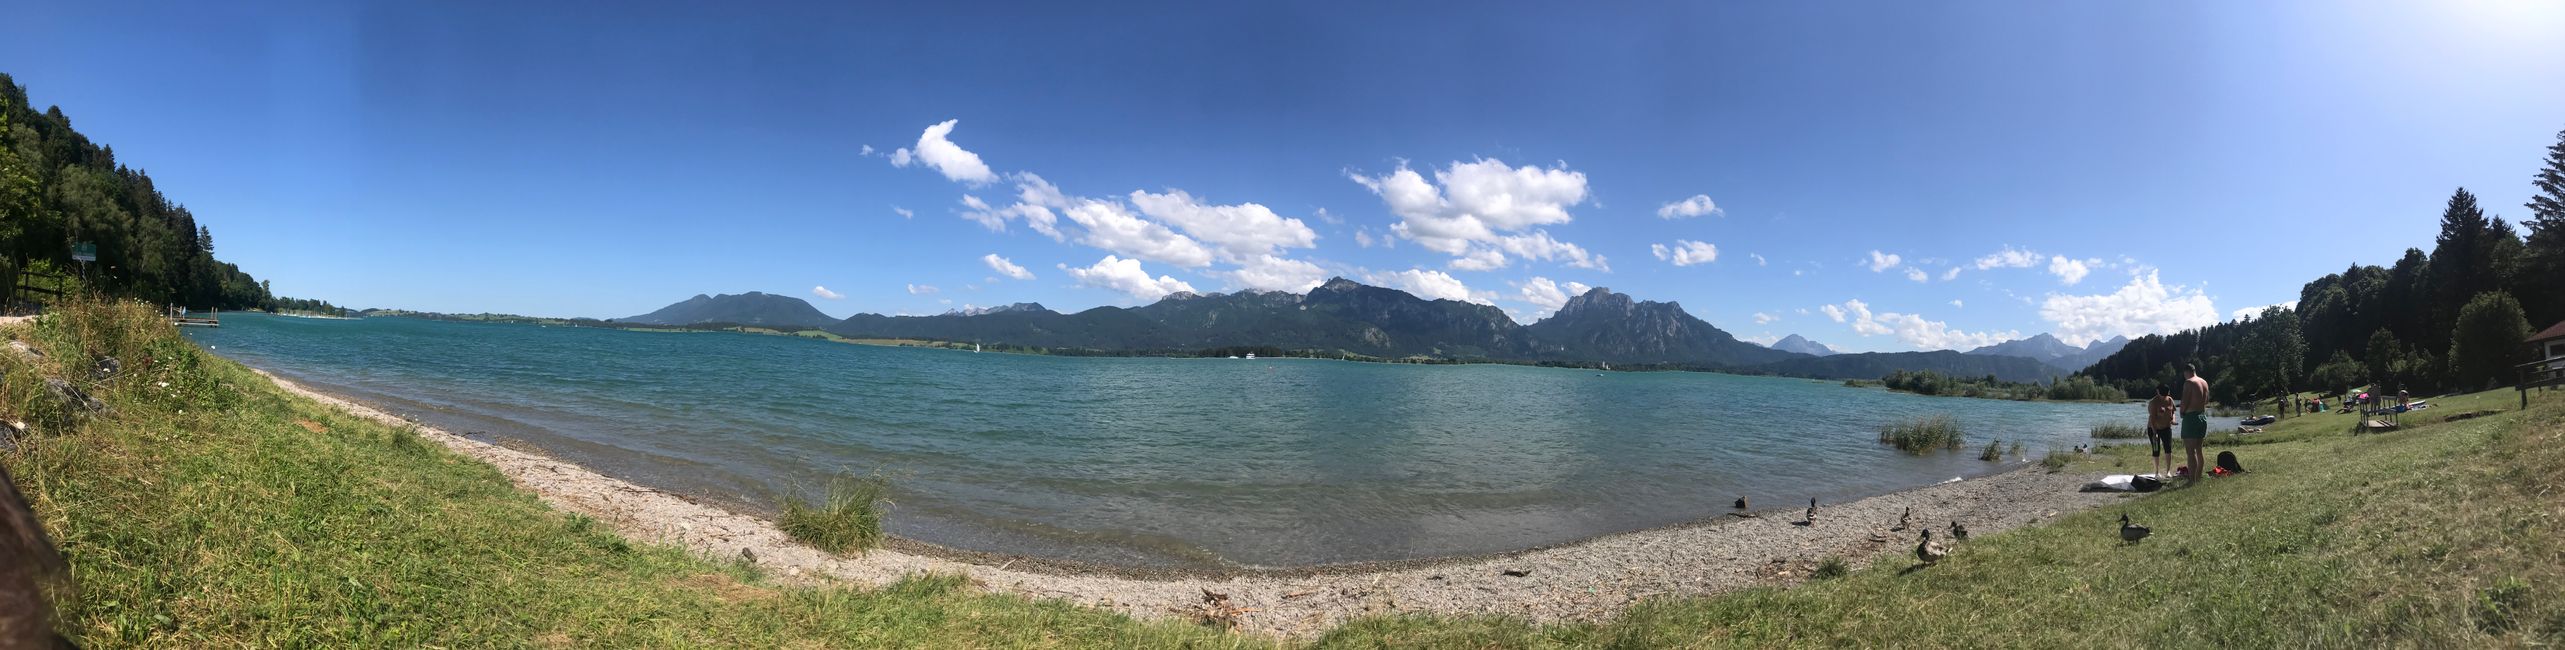 Pause am Forggensee